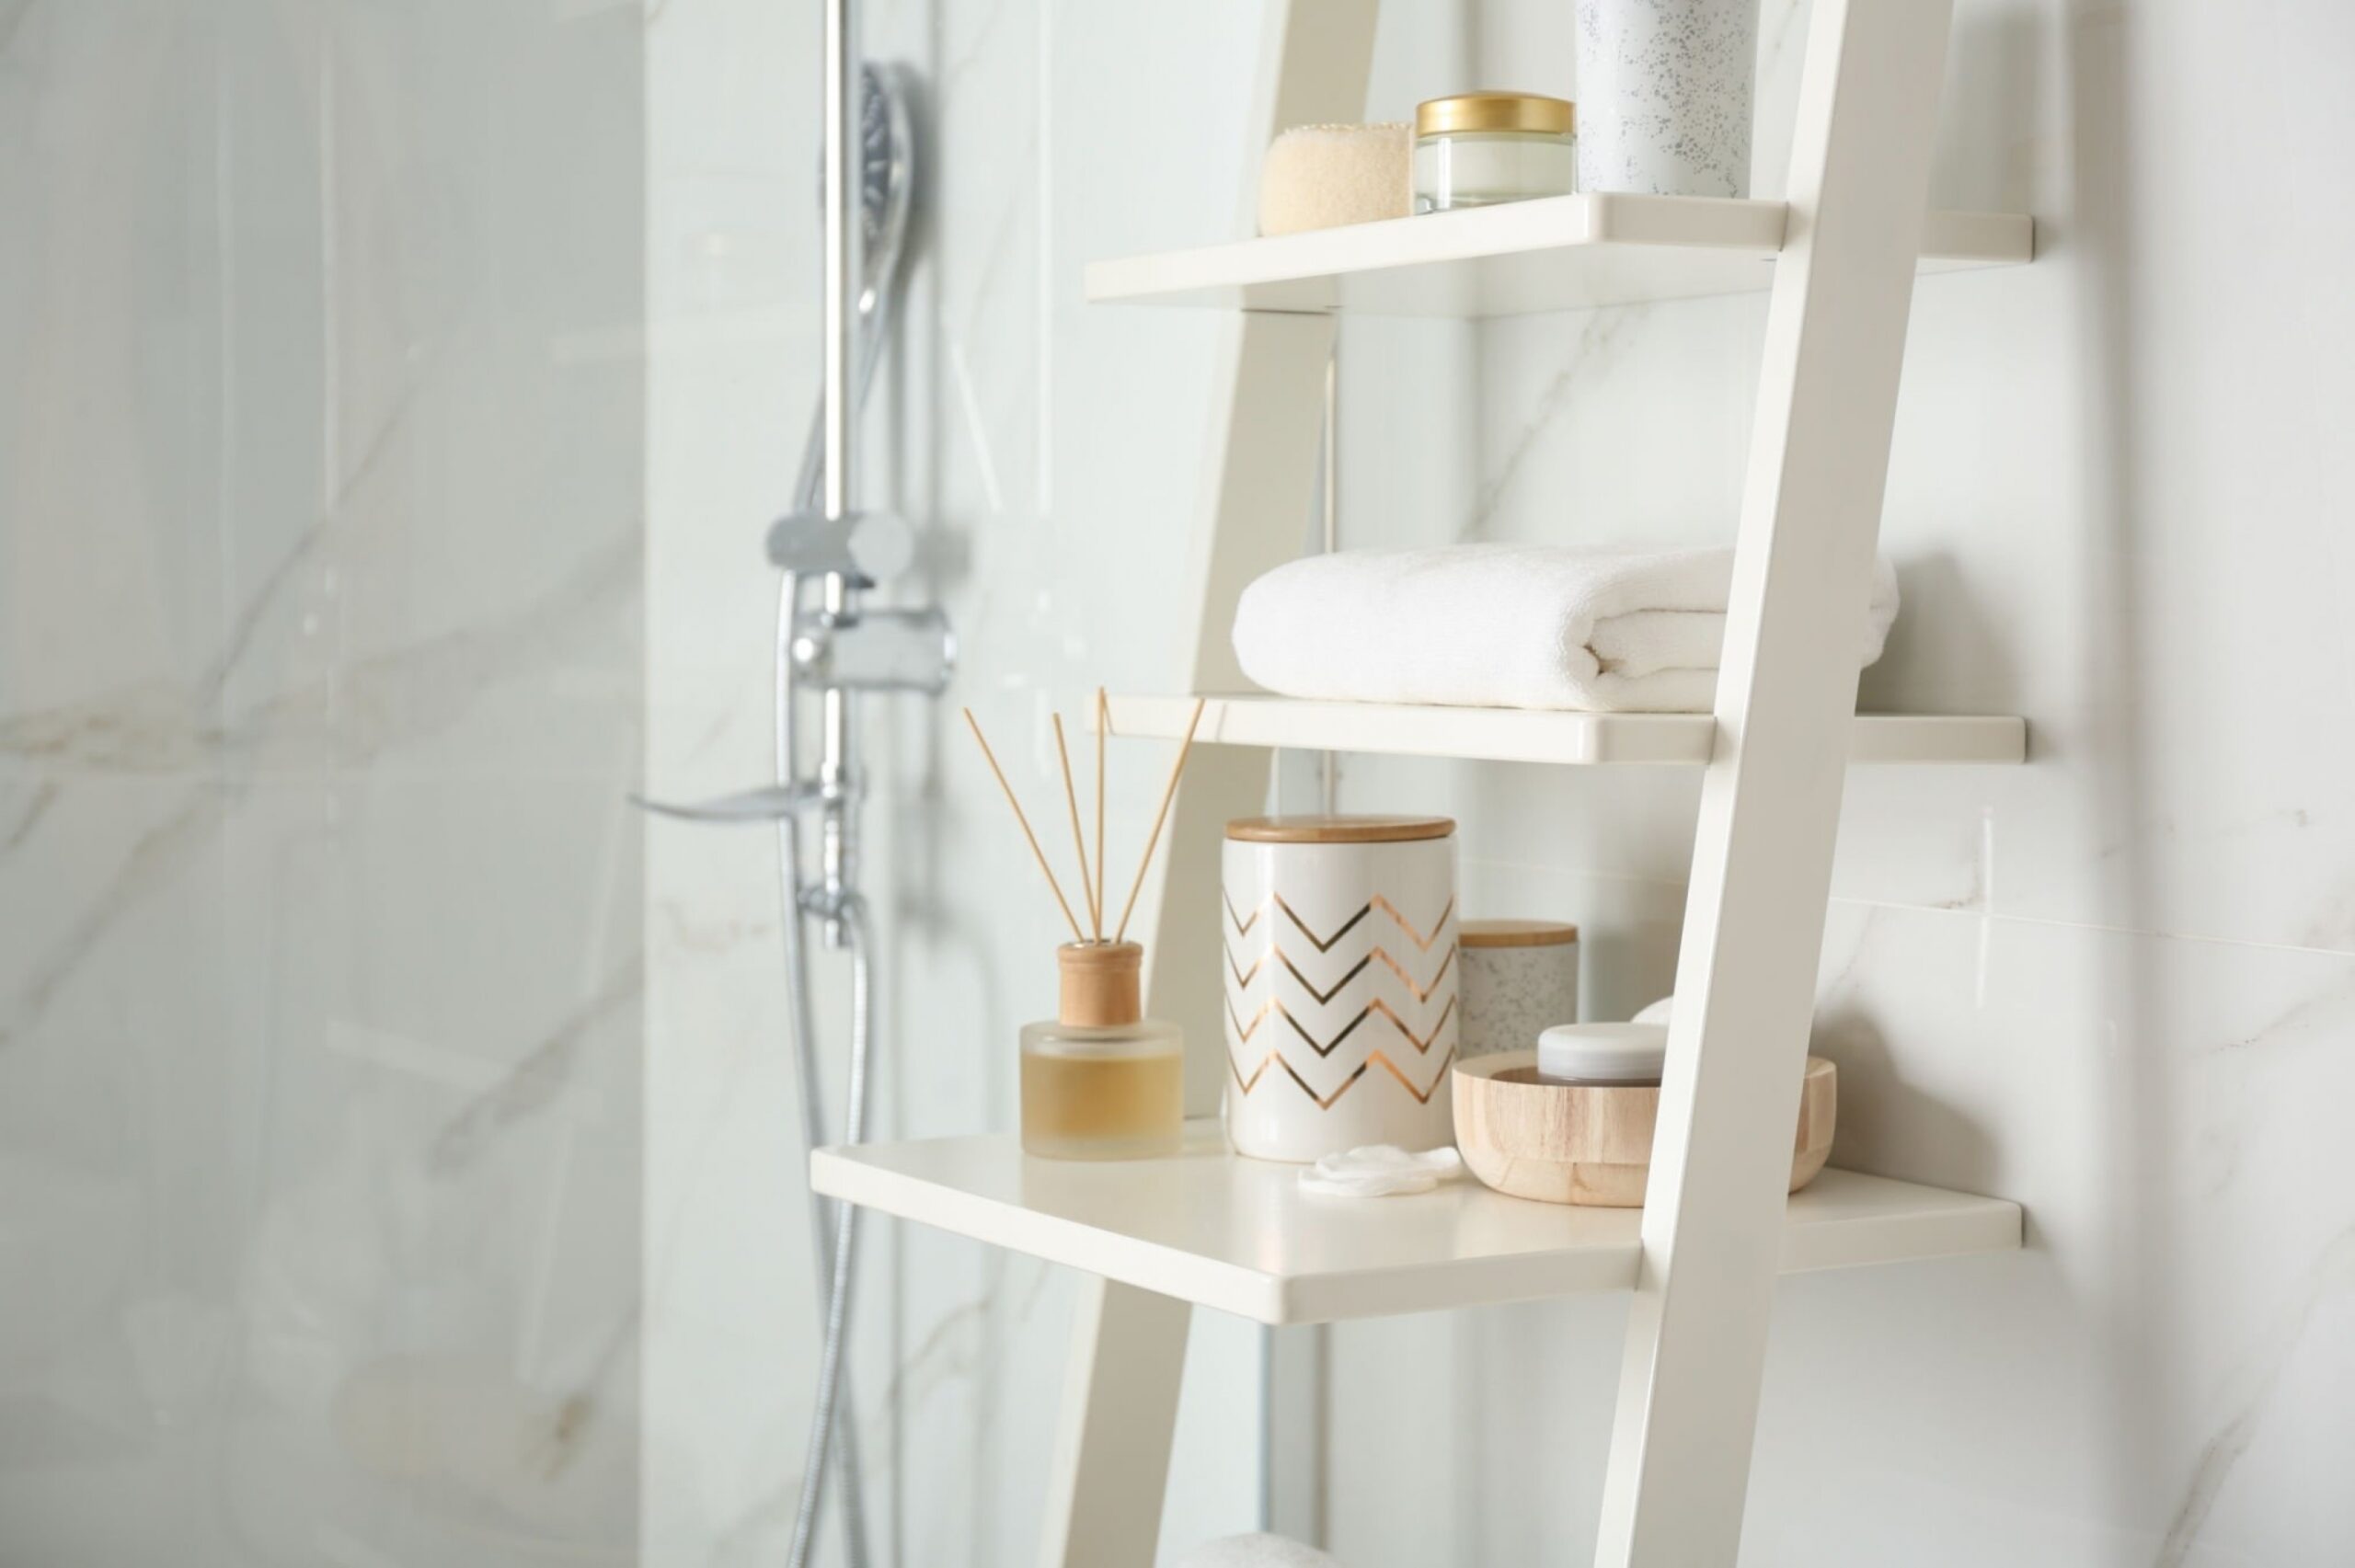 Shelving unit with different items in bathroom